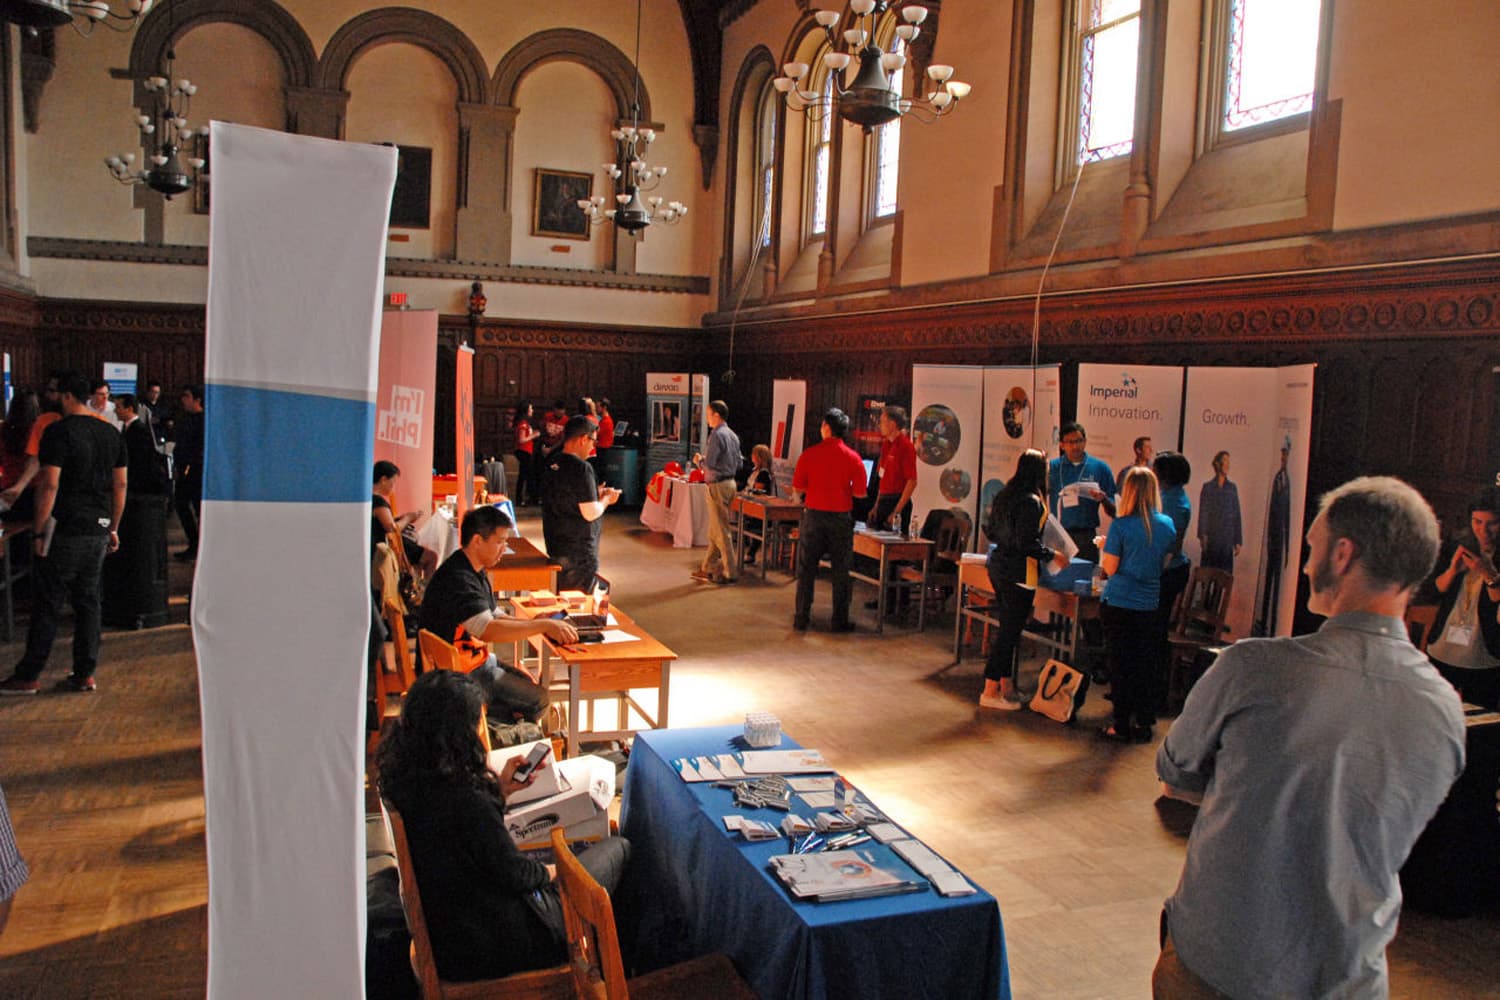 Students browse the offerings at the University of Toronto's 2014 Career Fair. (Aversan / Flickr)